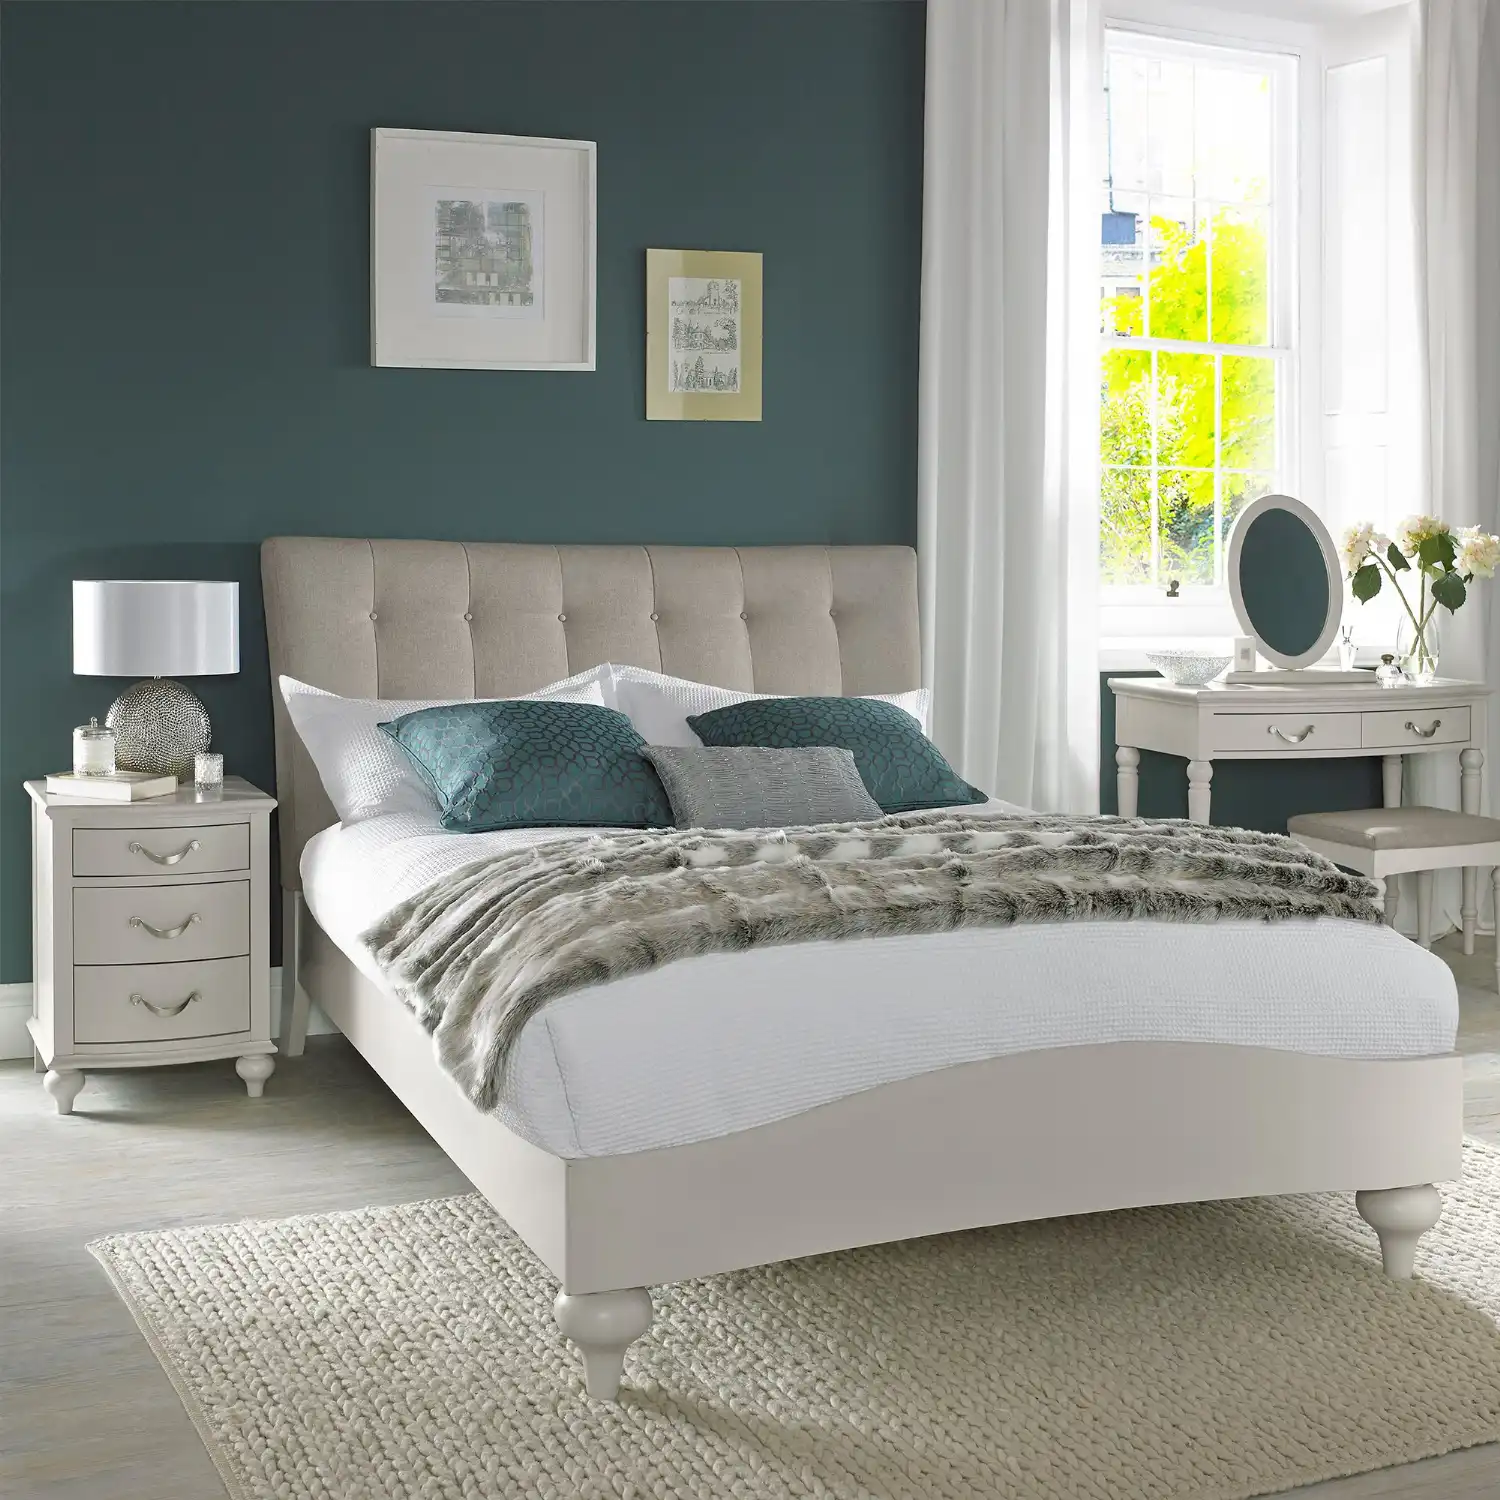 Grey Painted Fabric Headboard King Size Bed